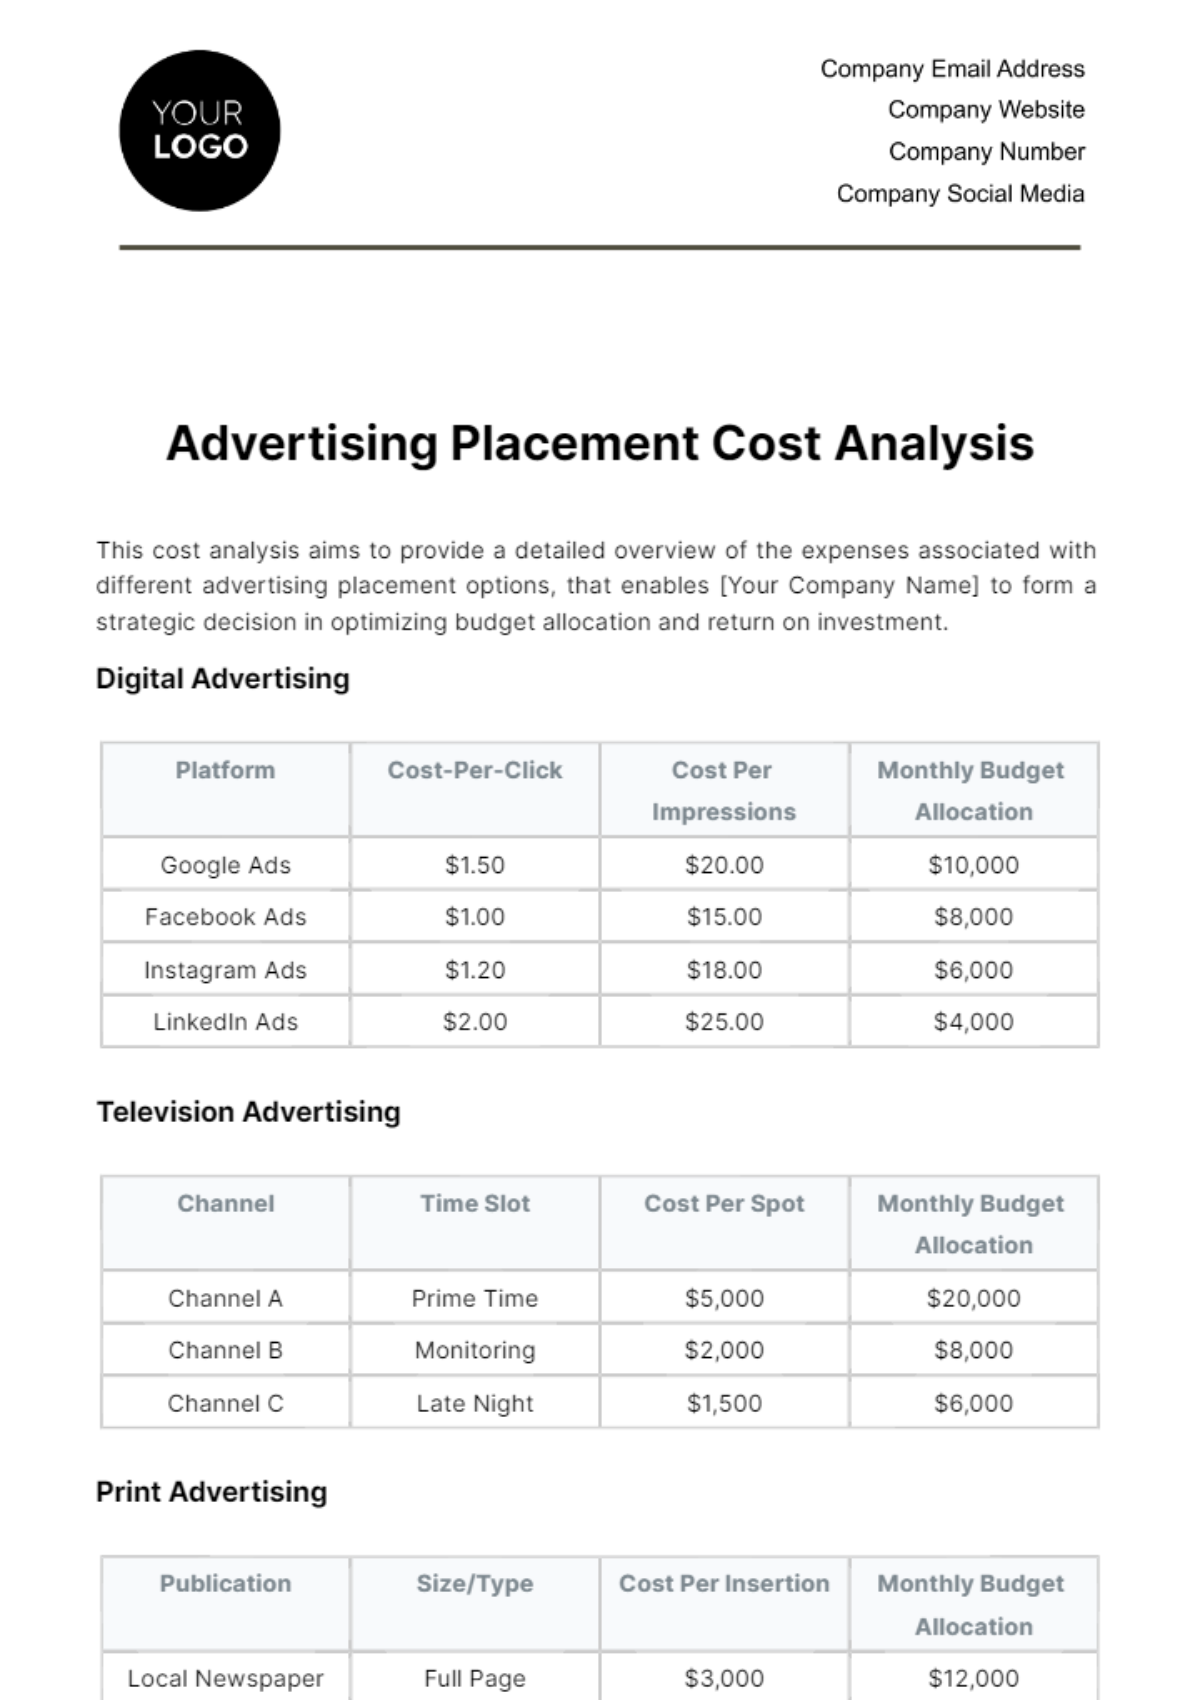 Advertising Placement Cost Analysis Template